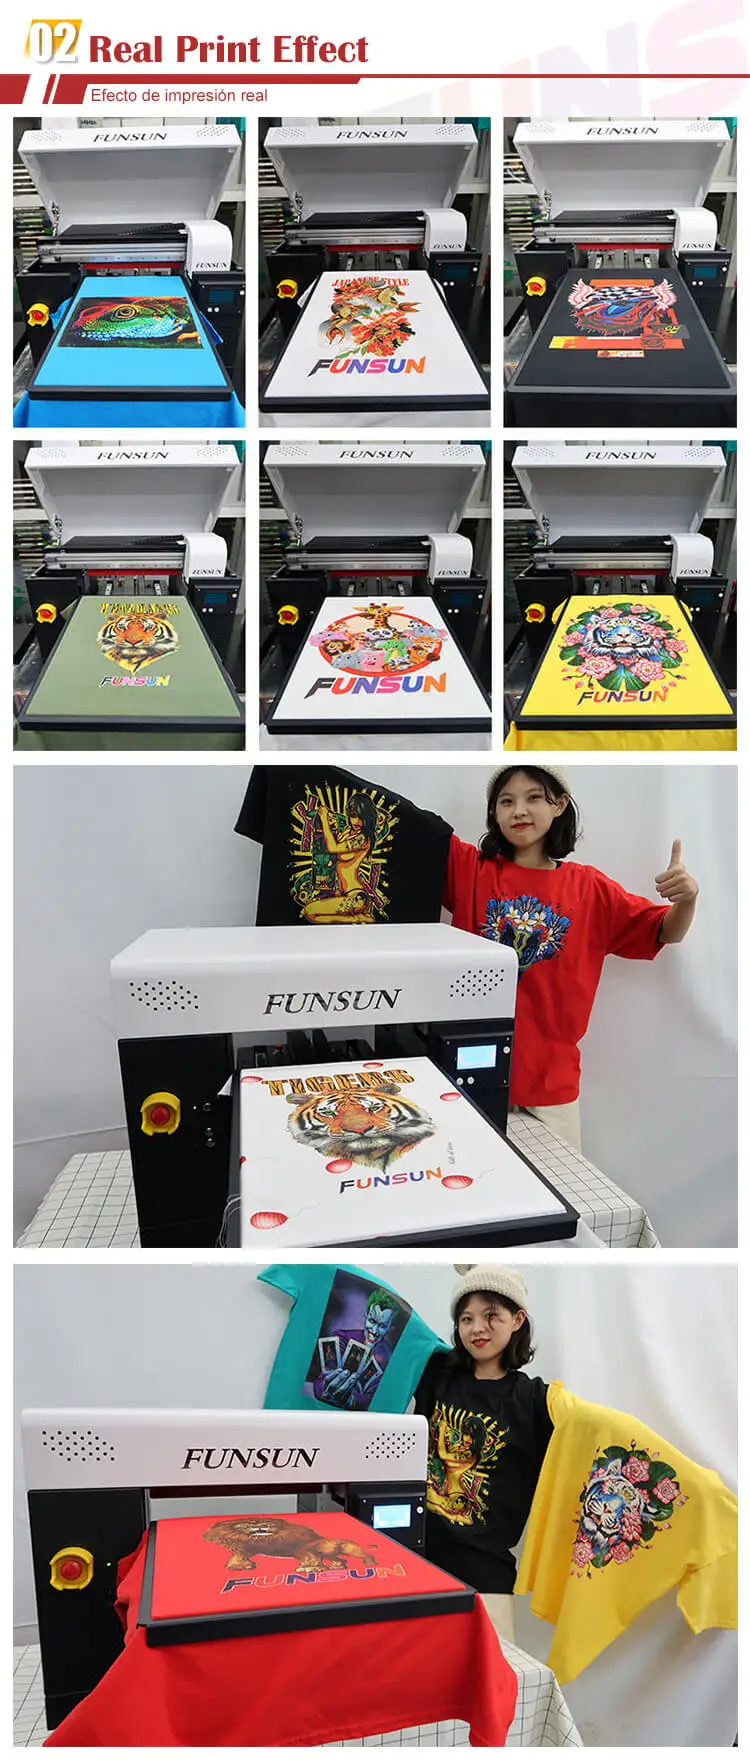 Newest A3 DTG printer digital textile printer polyester wool cotton t-shirt printing machine DTG Printer with dx9 for tshirt